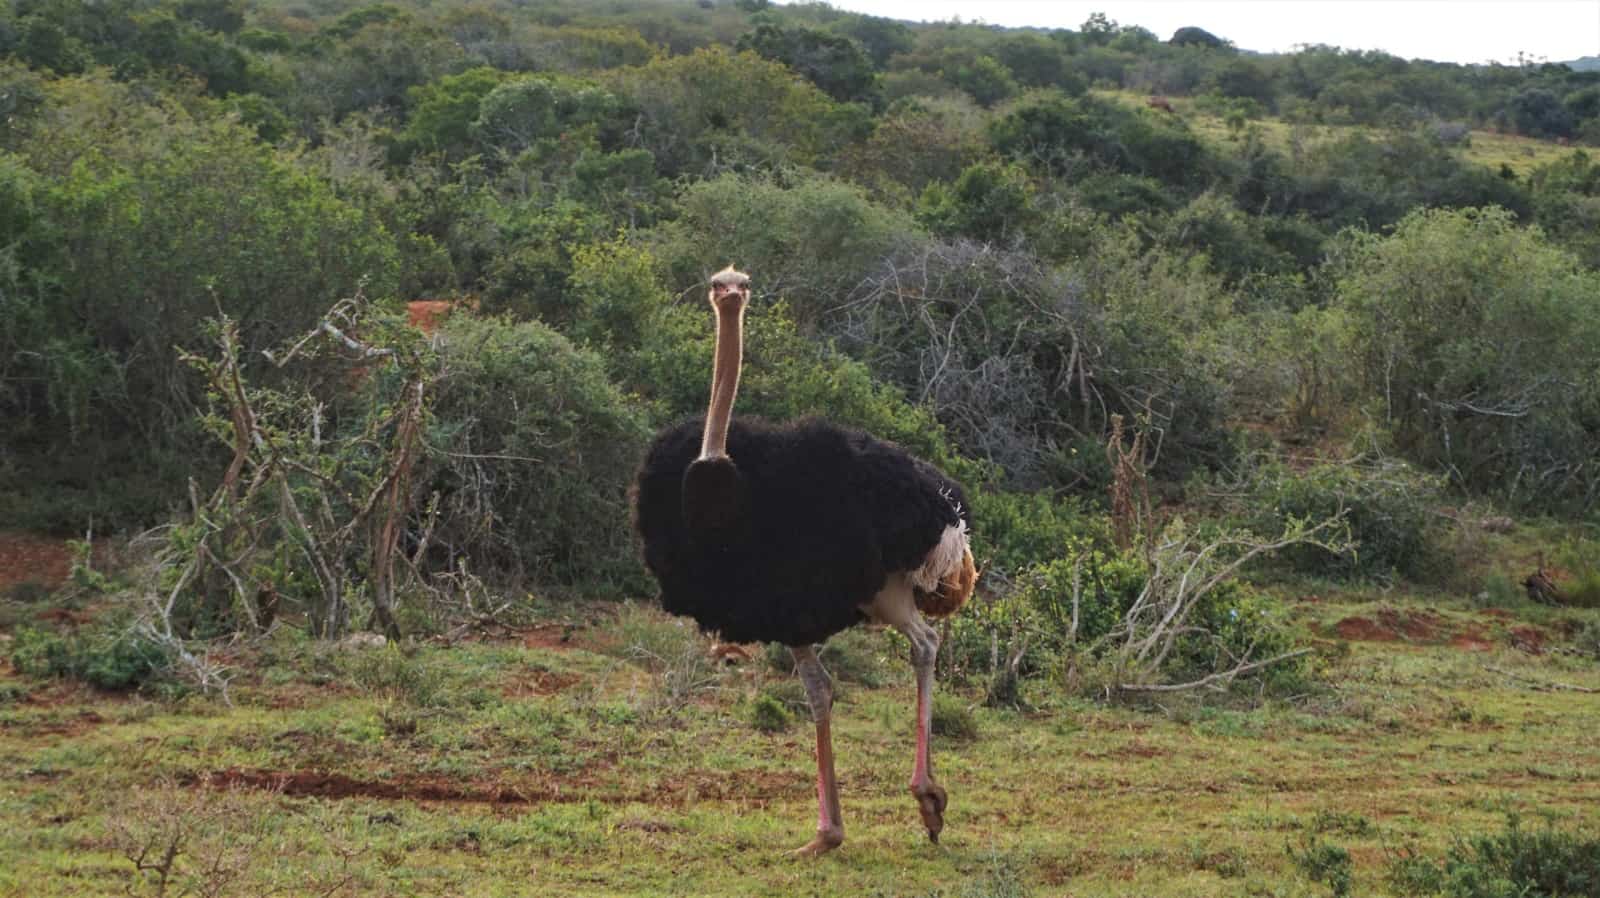 Ostrich at Addo Elephant National Park, South Africa